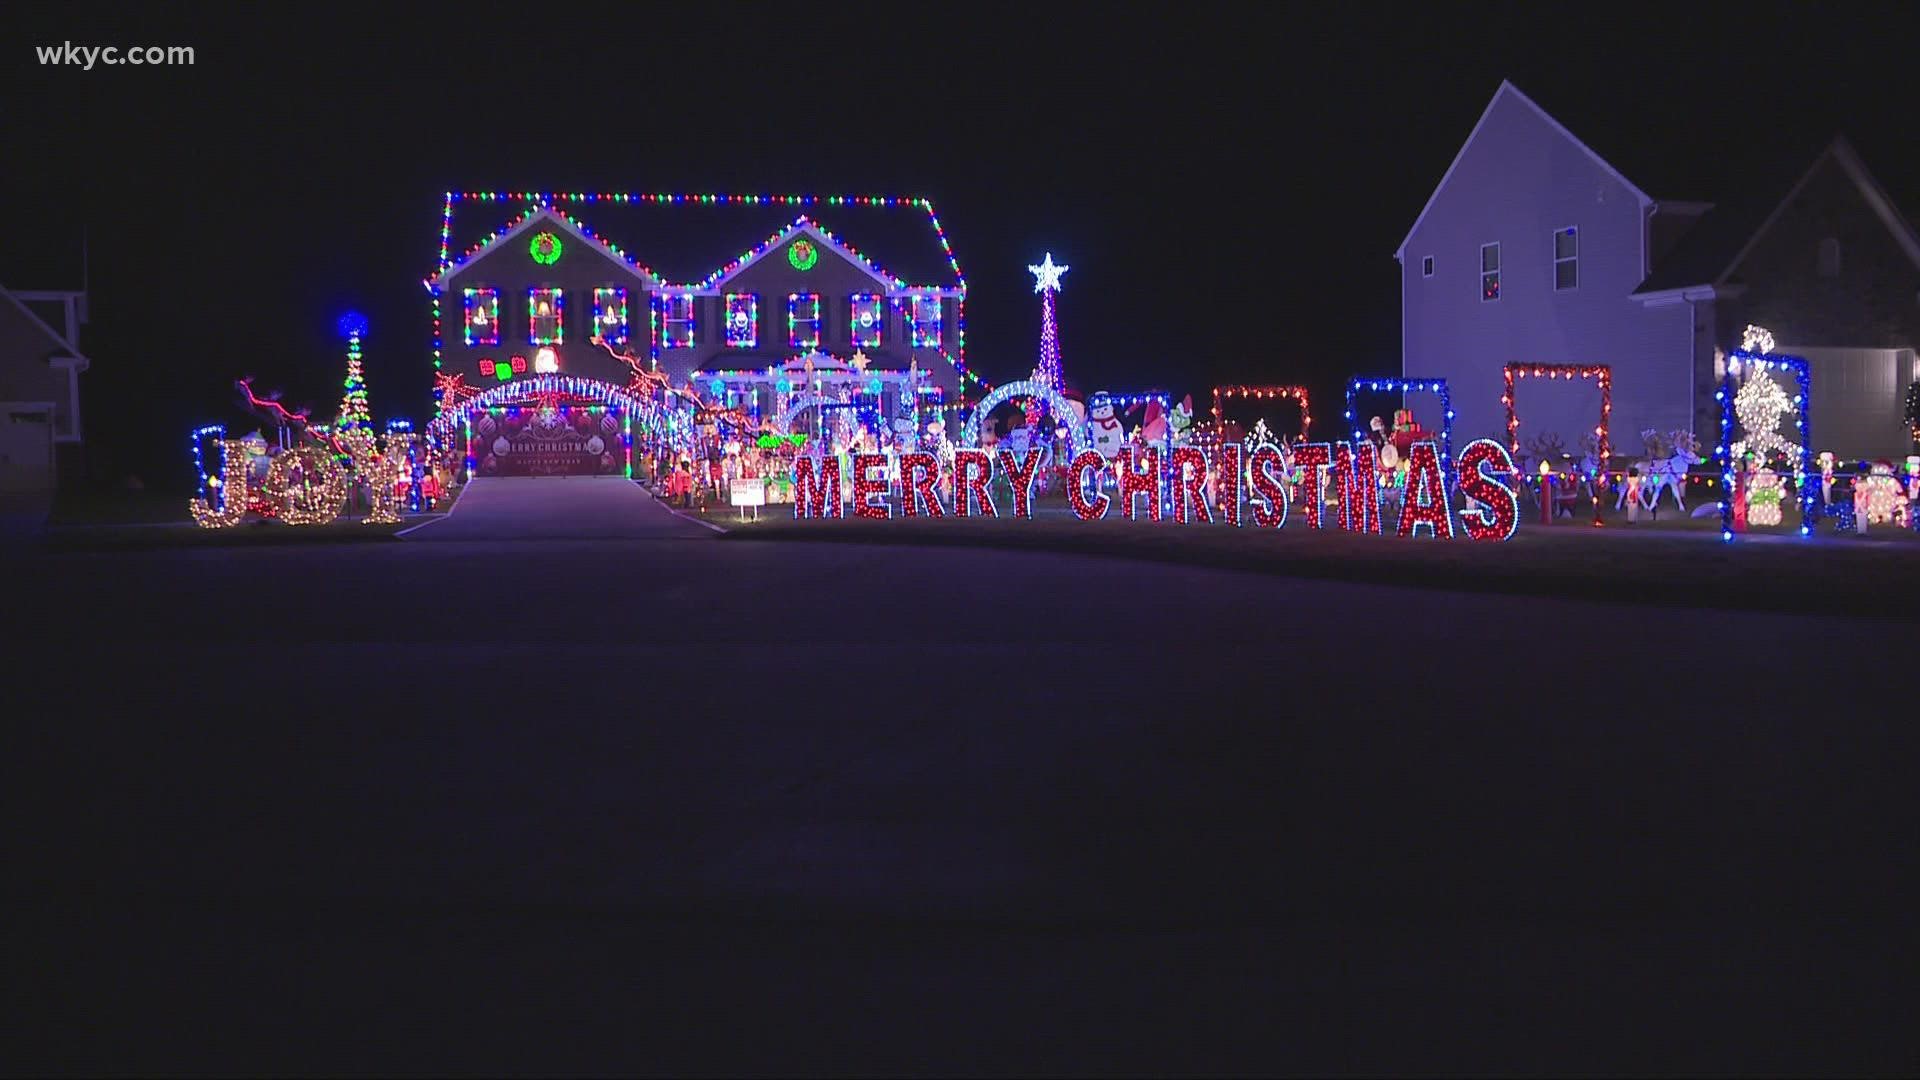 Epic Christmas lights display in Medina brings out the Grinch to help